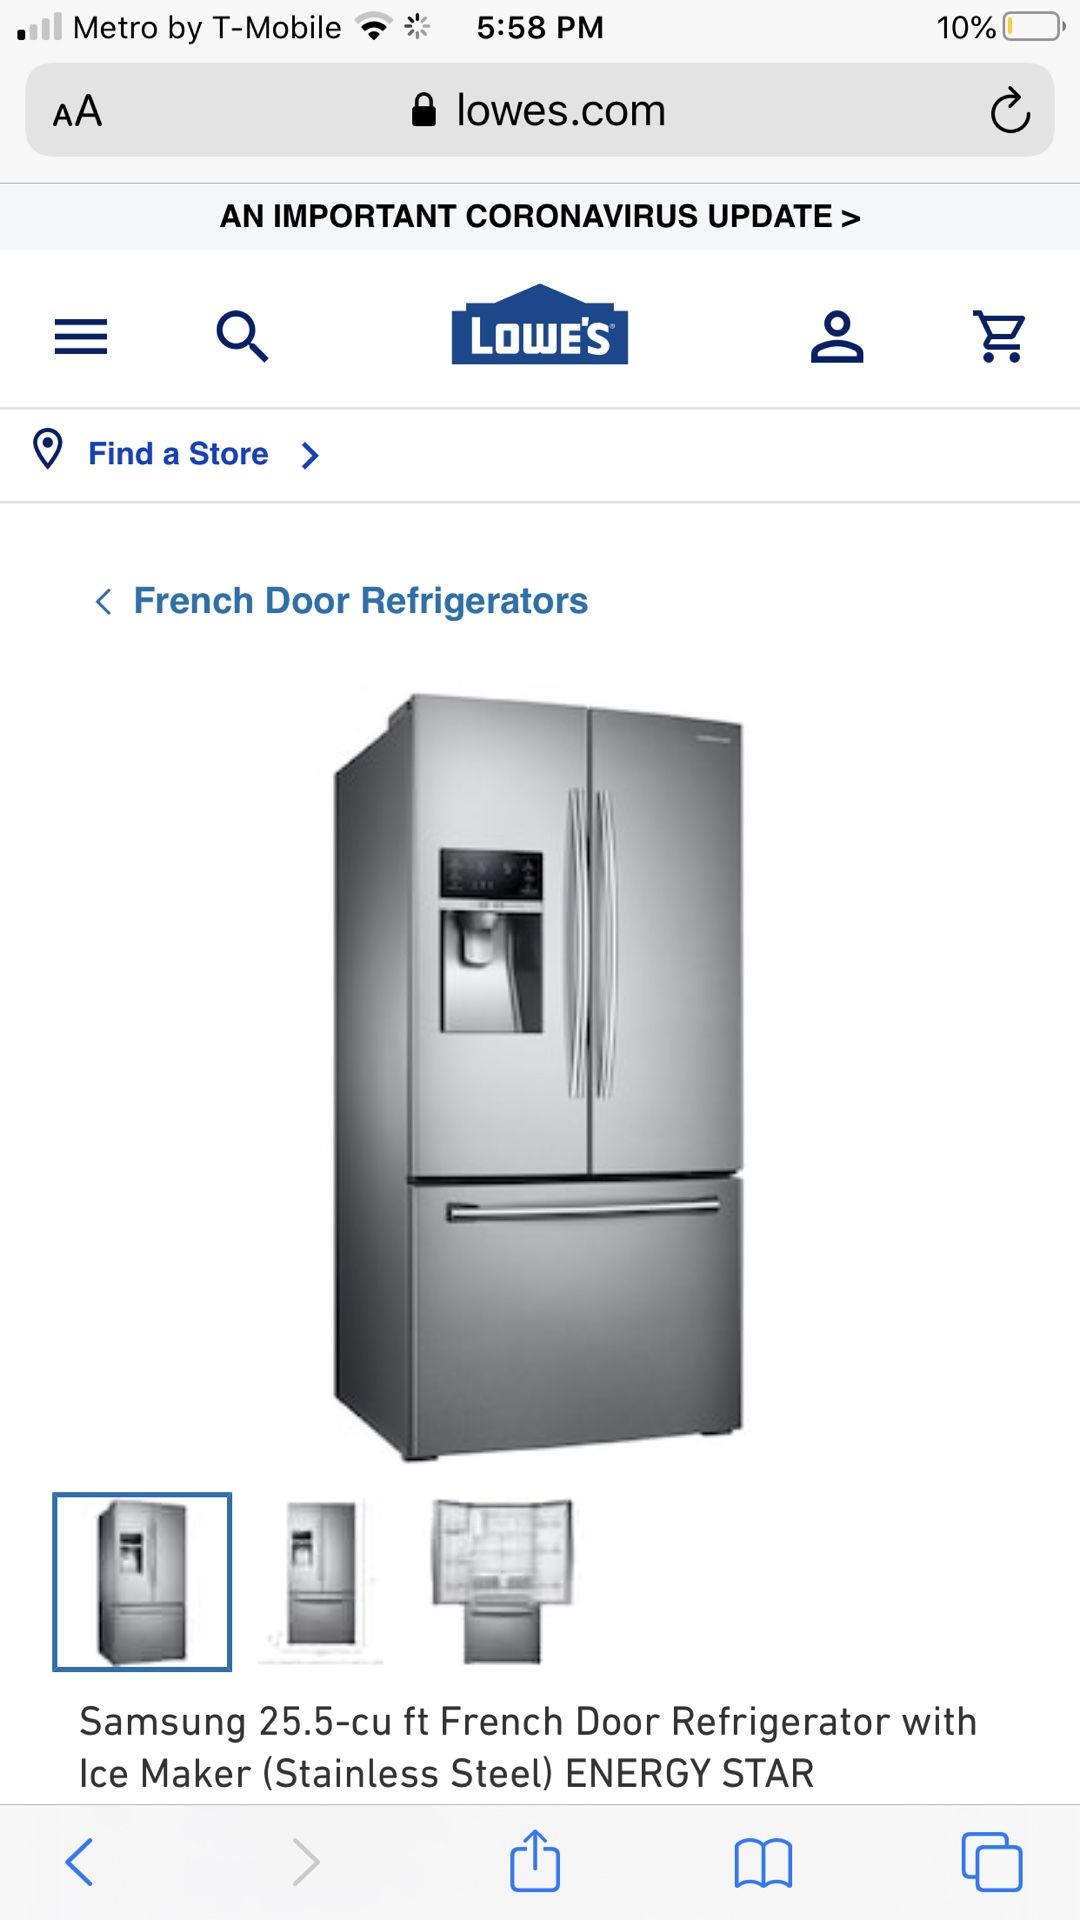 Samsung 25.5-cu ft French Door Refrigerator with Ice Maker (Stainless Steel) ENERGY STAR Item # 632834 Model # RF26J7500SR